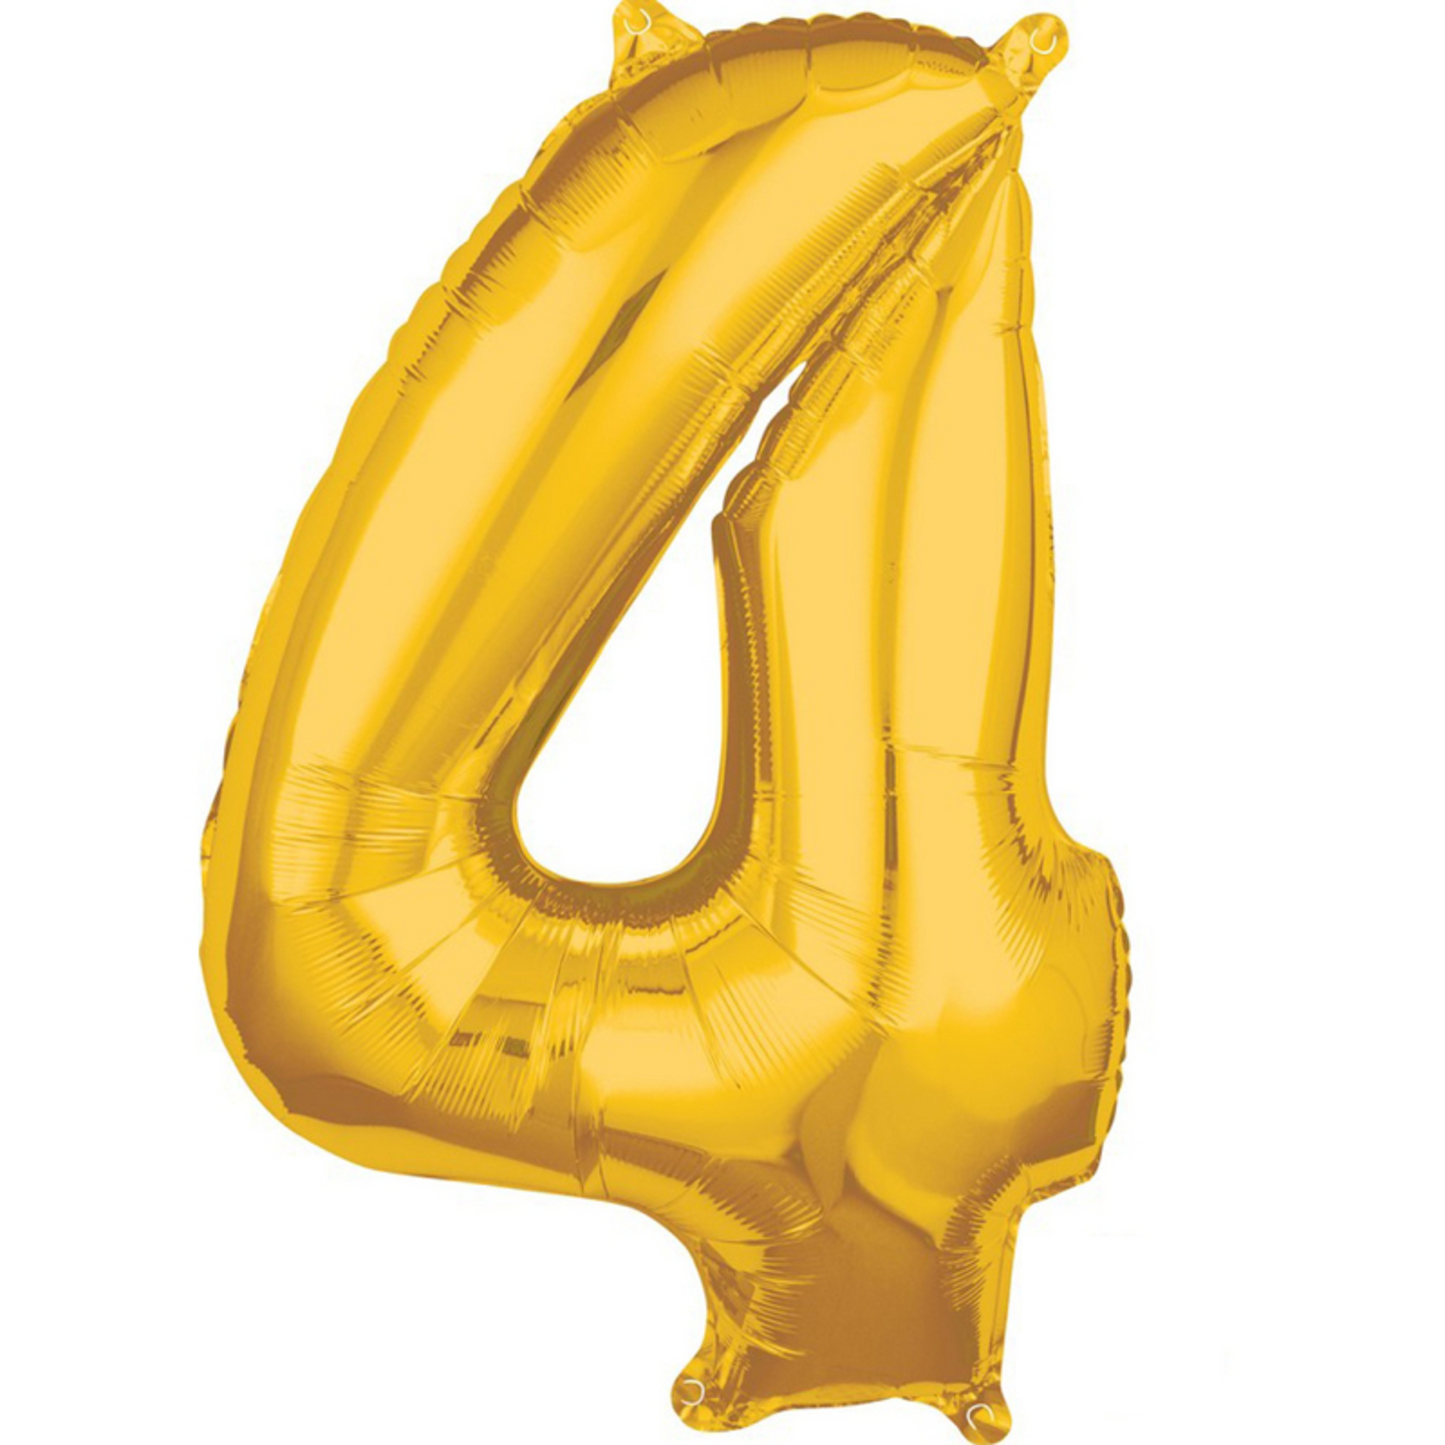 Number Balloon (Gold) / 35cm (14") Tall